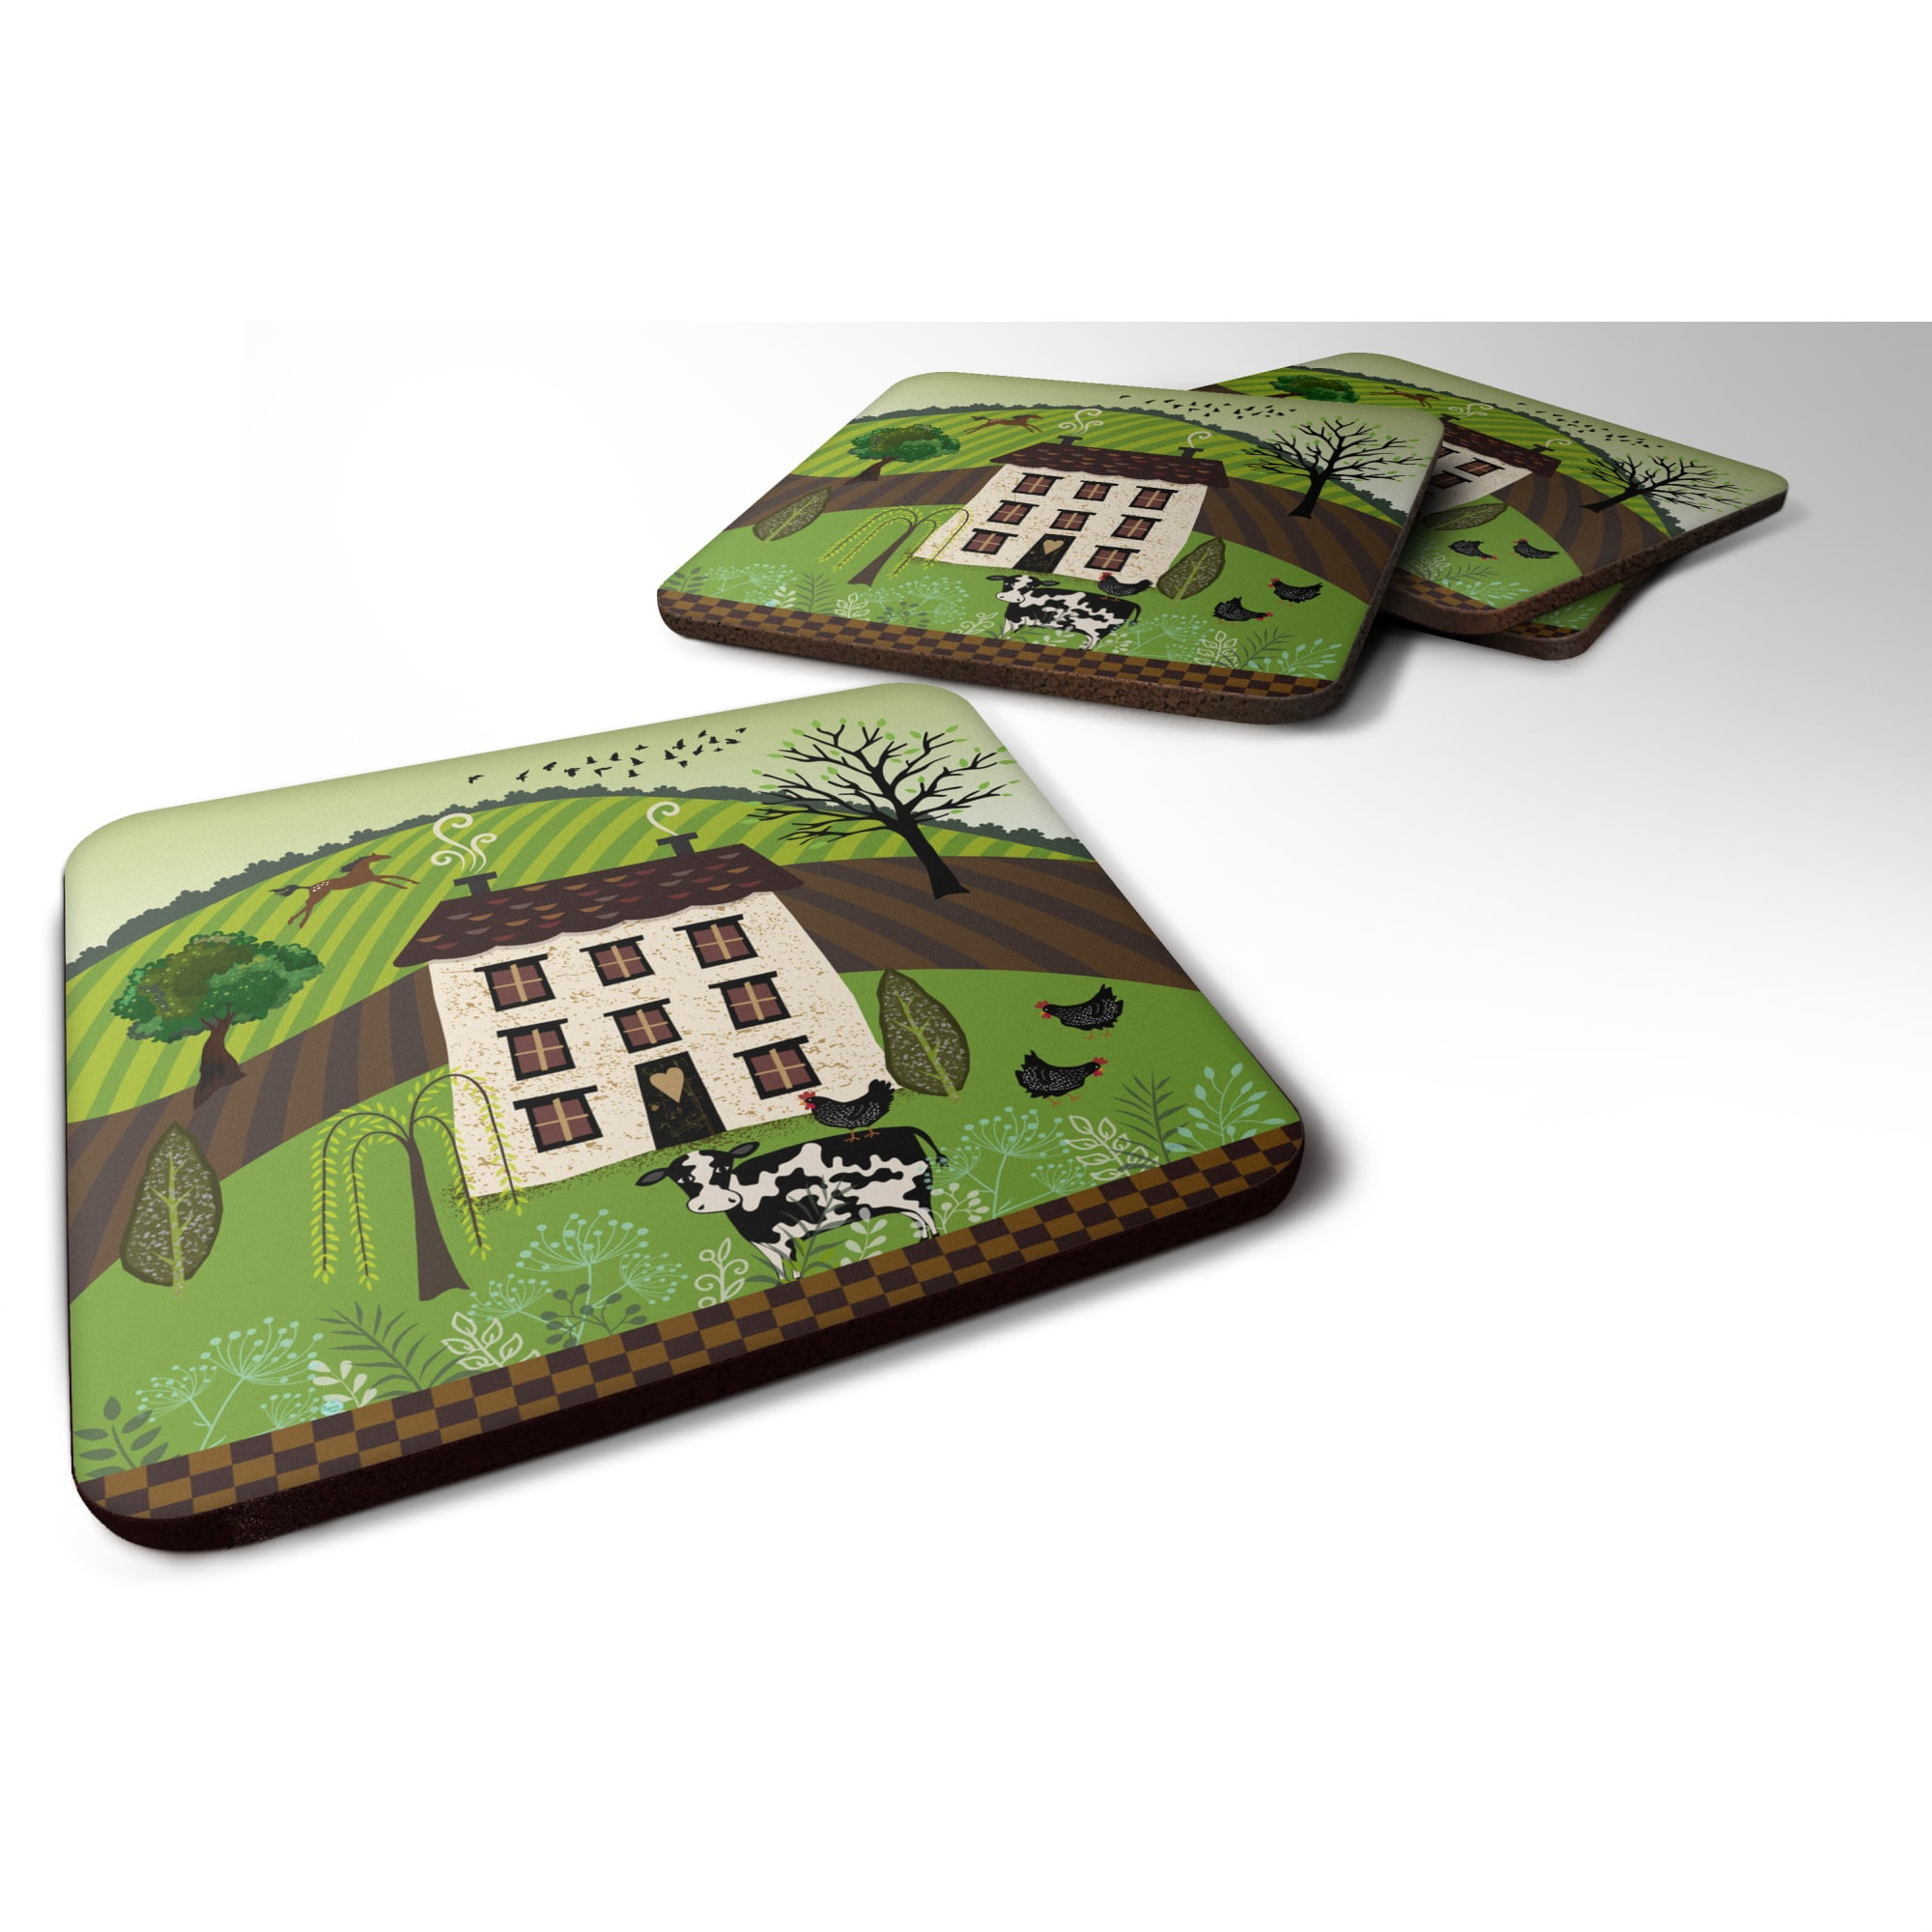 BICHON--House is Not a Home-Set of 2 Absorbent Stone Coasters w/Cork Back 